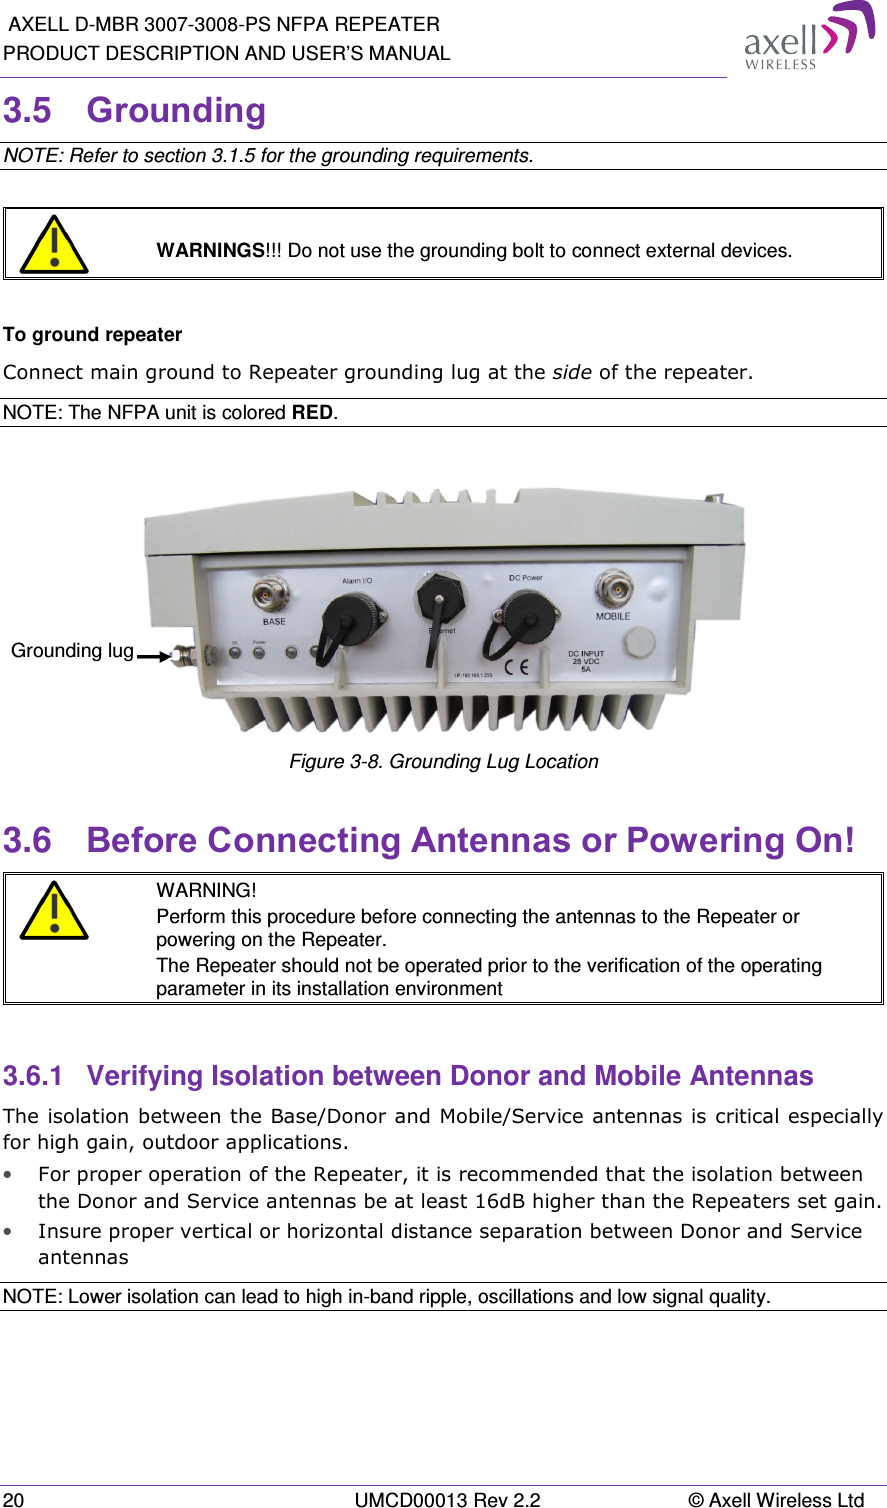  AXELL D-MBR 3007-3008-PS NFPA REPEATER PRODUCT DESCRIPTION AND USER’S MANUAL 20  UMCD00013 Rev 2.2  © Axell Wireless Ltd 3.5  Grounding  NOTE: Refer to section 3.1.5 for the grounding requirements.    WARNINGS!!! Do not use the grounding bolt to connect external devices.  To ground repeater Connect main ground to Repeater grounding lug at the side of the repeater.  NOTE: The NFPA unit is colored RED.   Figure 3-8. Grounding Lug Location 3.6  Before Connecting Antennas or Powering On!  WARNING! Perform this procedure before connecting the antennas to the Repeater or powering on the Repeater. The Repeater should not be operated prior to the verification of the operating parameter in its installation environment  3.6.1  Verifying Isolation between Donor and Mobile Antennas  The isolation between the Base/Donor and Mobile/Service antennas is critical especially for high gain, outdoor applications.  • For proper operation of the Repeater, it is recommended that the isolation between the Donor and Service antennas be at least 16dB higher than the Repeaters set gain.  • Insure proper vertical or horizontal distance separation between Donor and Service antennas NOTE: Lower isolation can lead to high in-band ripple, oscillations and low signal quality.    Grounding lug